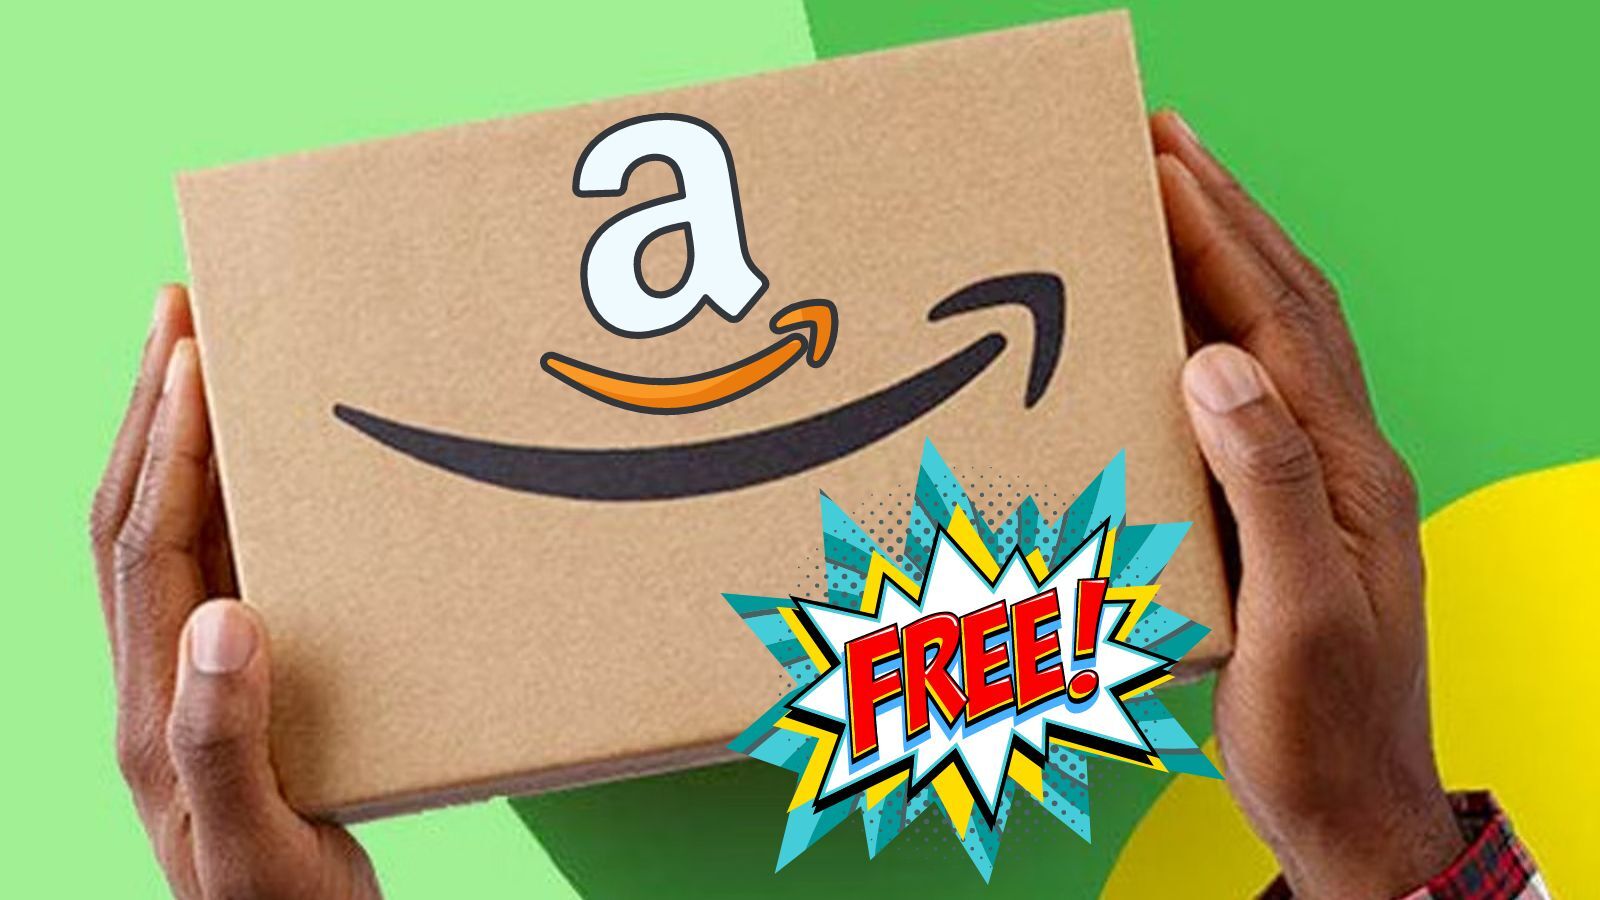 How to Get Free Stuff On Amazon (13 Tips!)